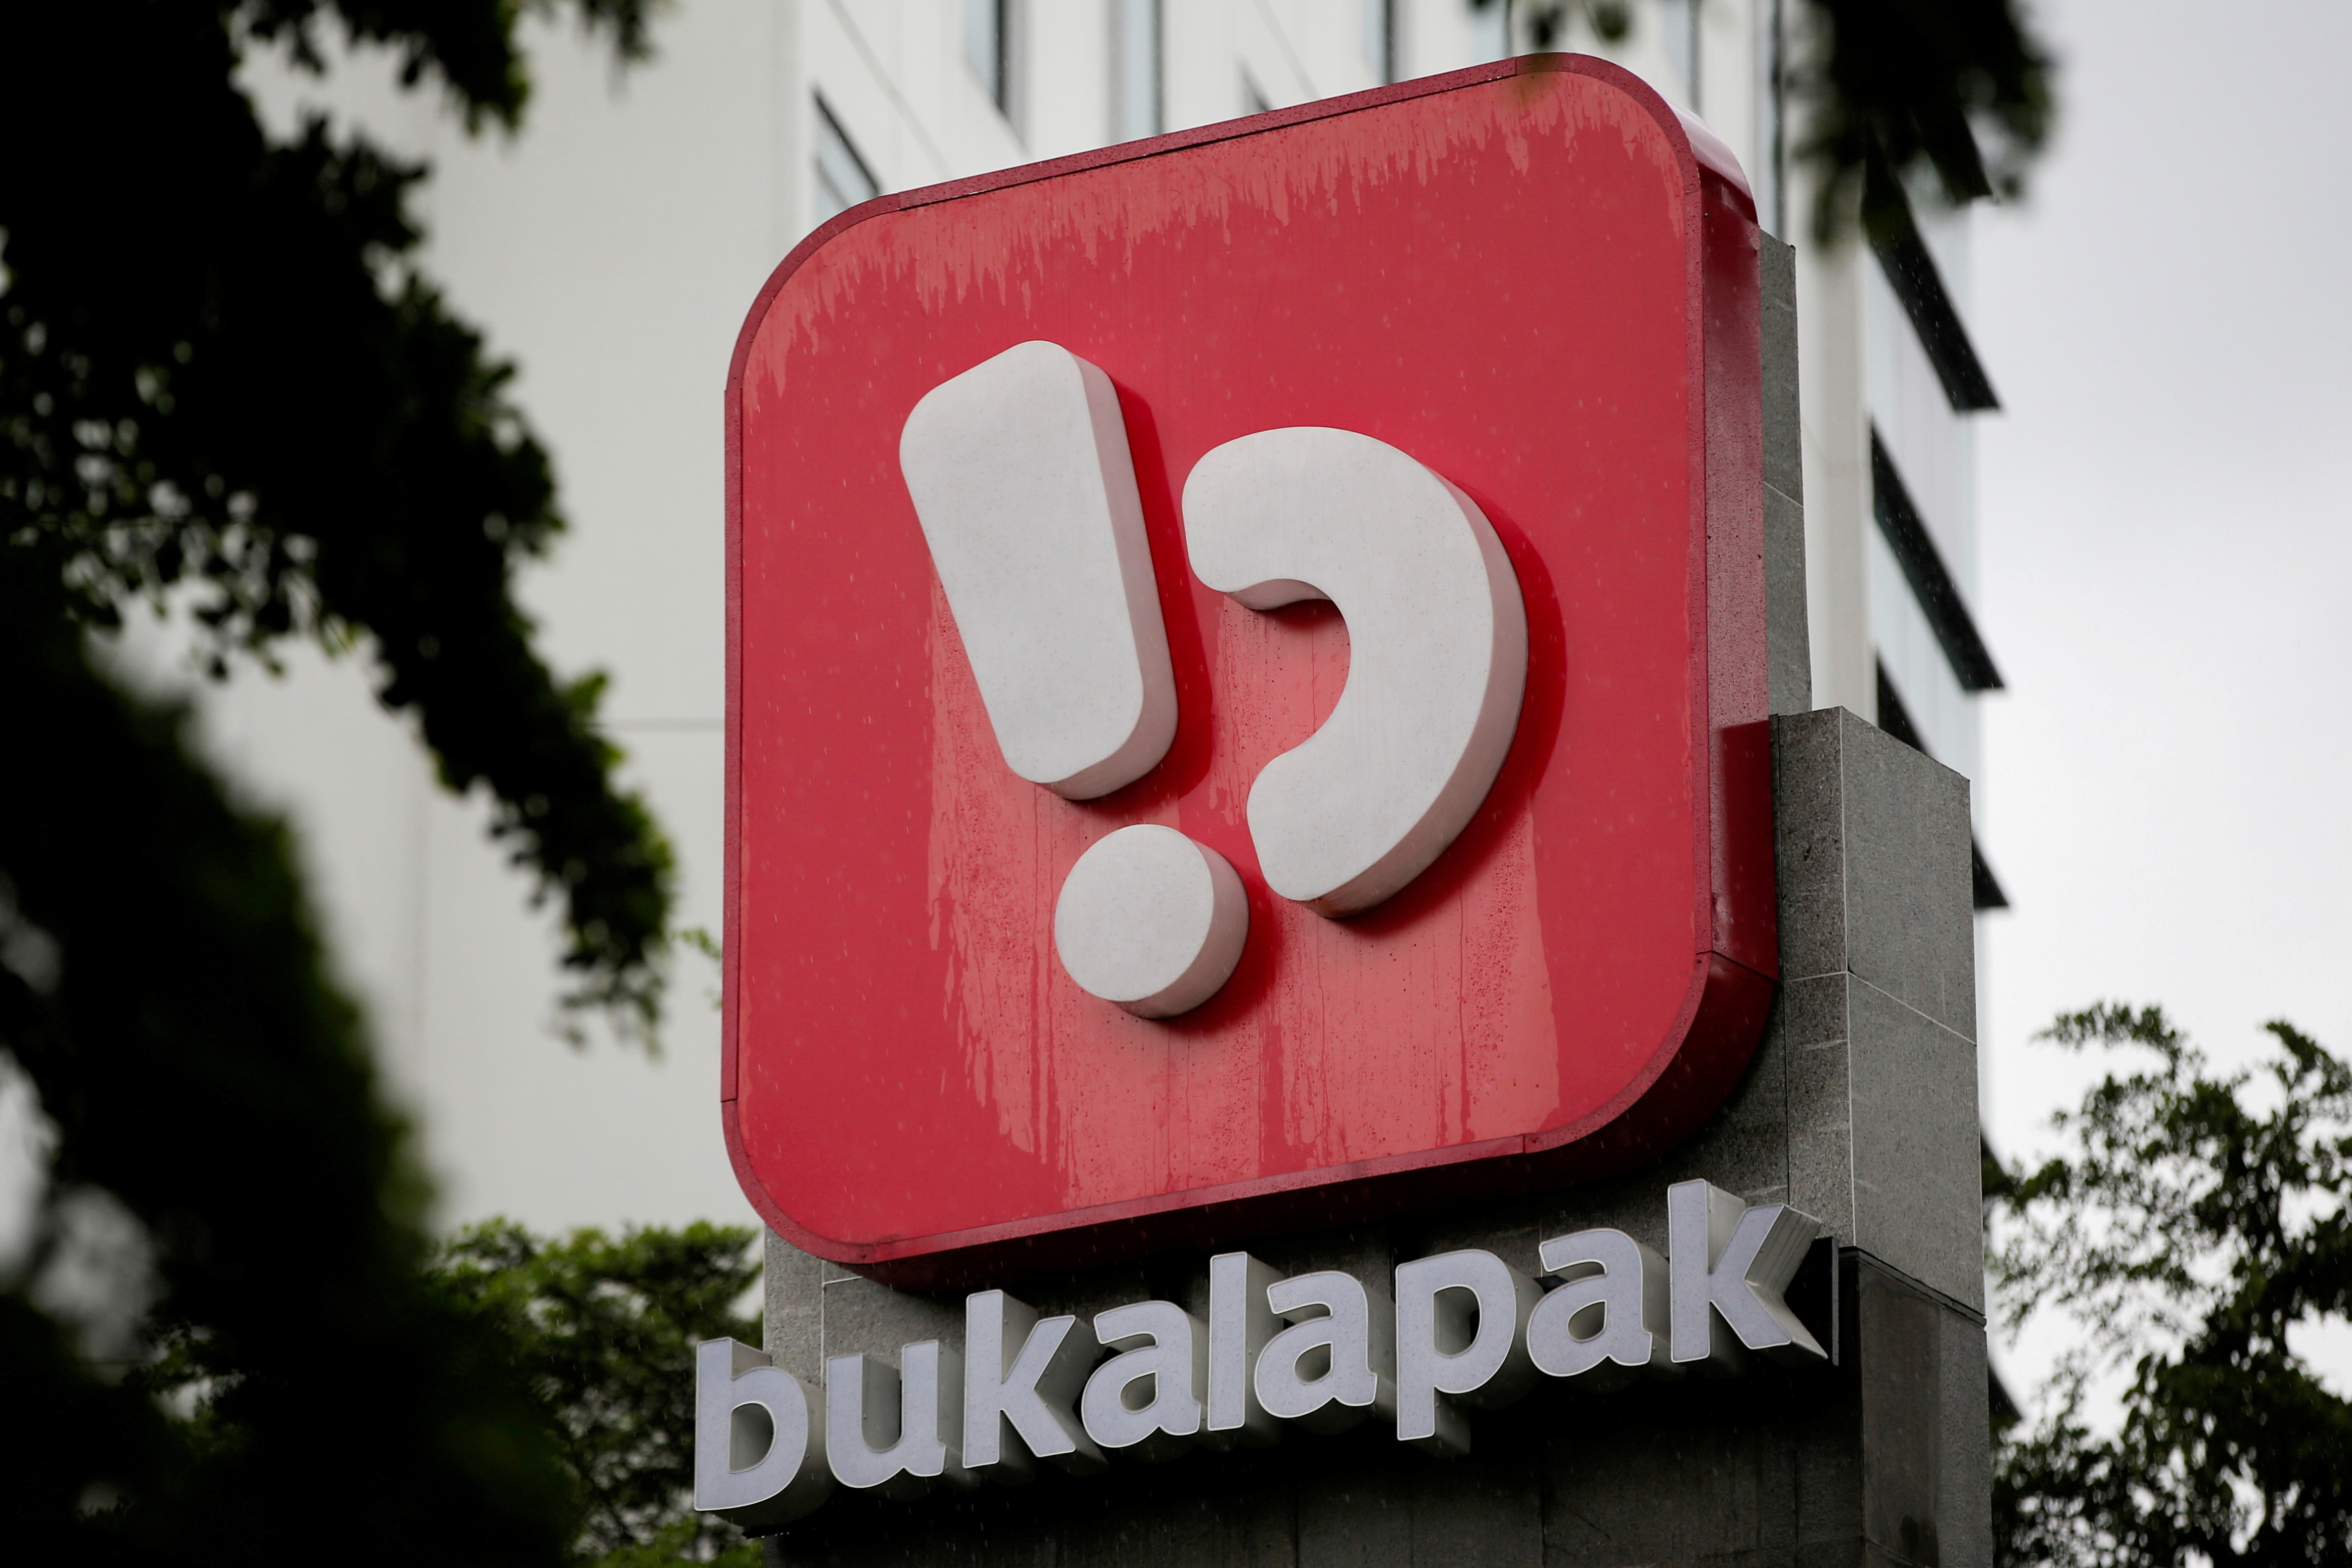 The logo of Bukalapak, an Indonesian e-commerce firm, is seen outside its headquarters in Jakarta